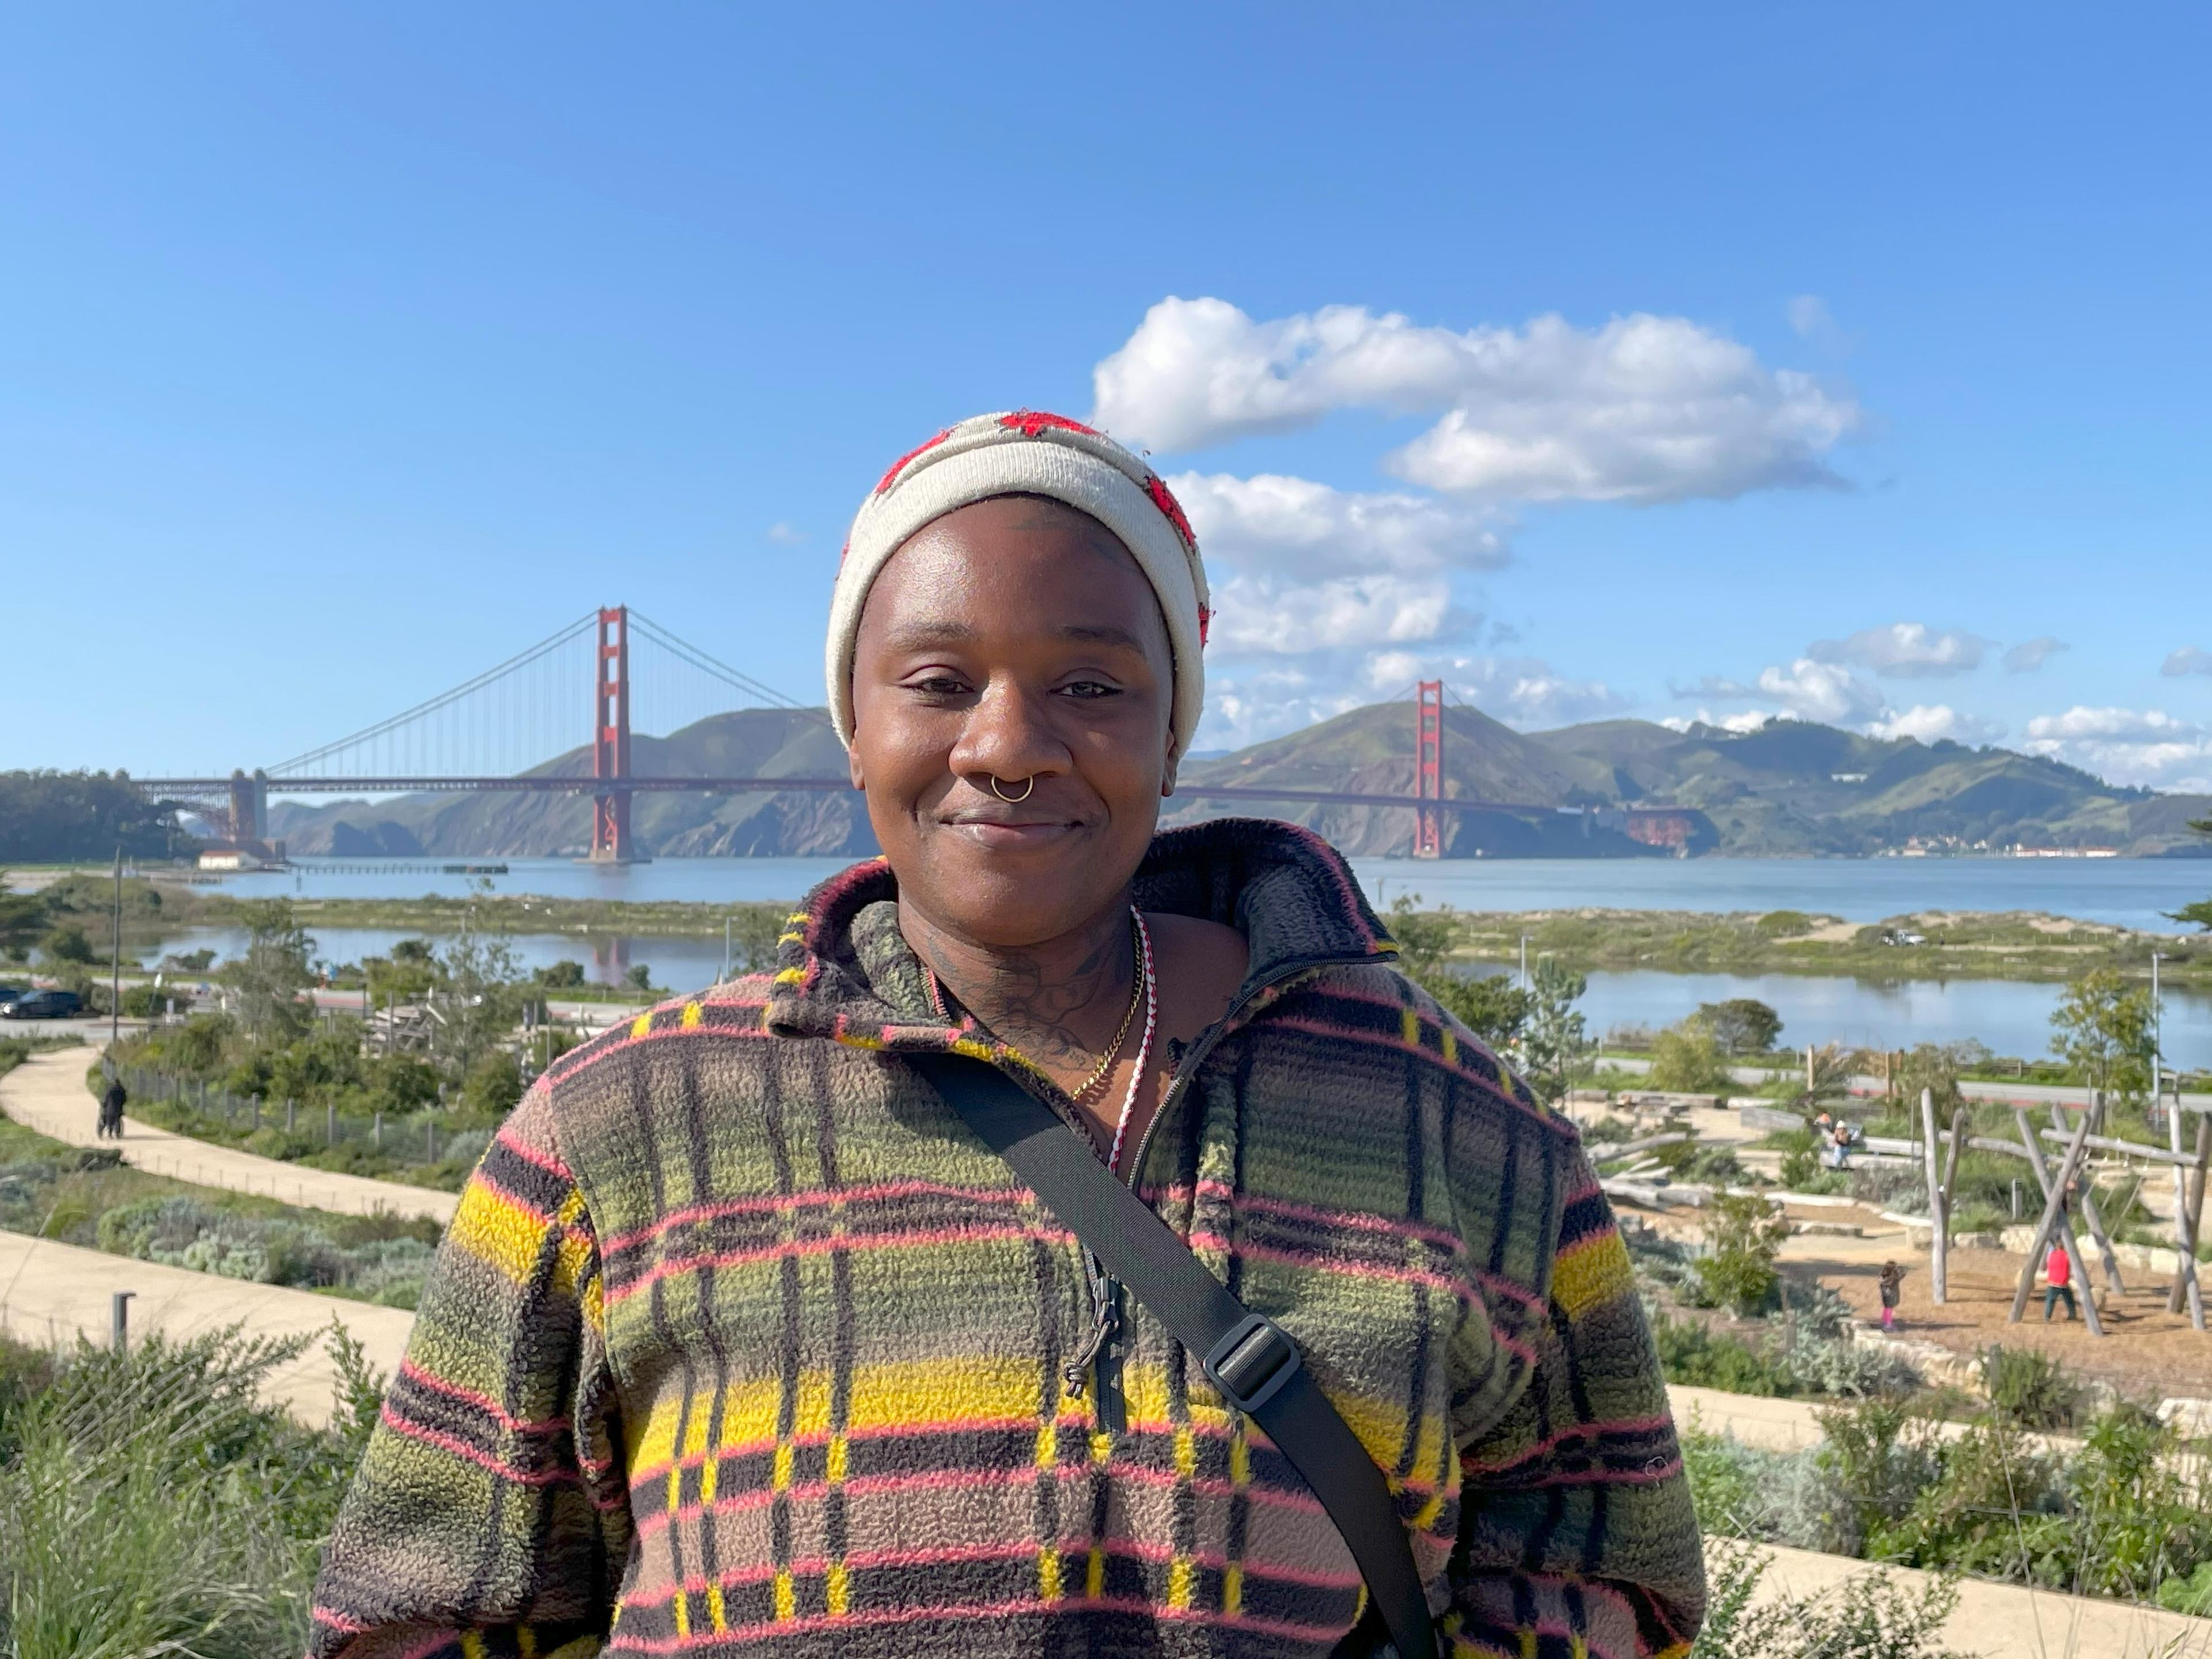 Image of a woman standing and smiling in a plaid jacket on the Presidio Tunnel Tops with the Golden Gate Bridge in the background.